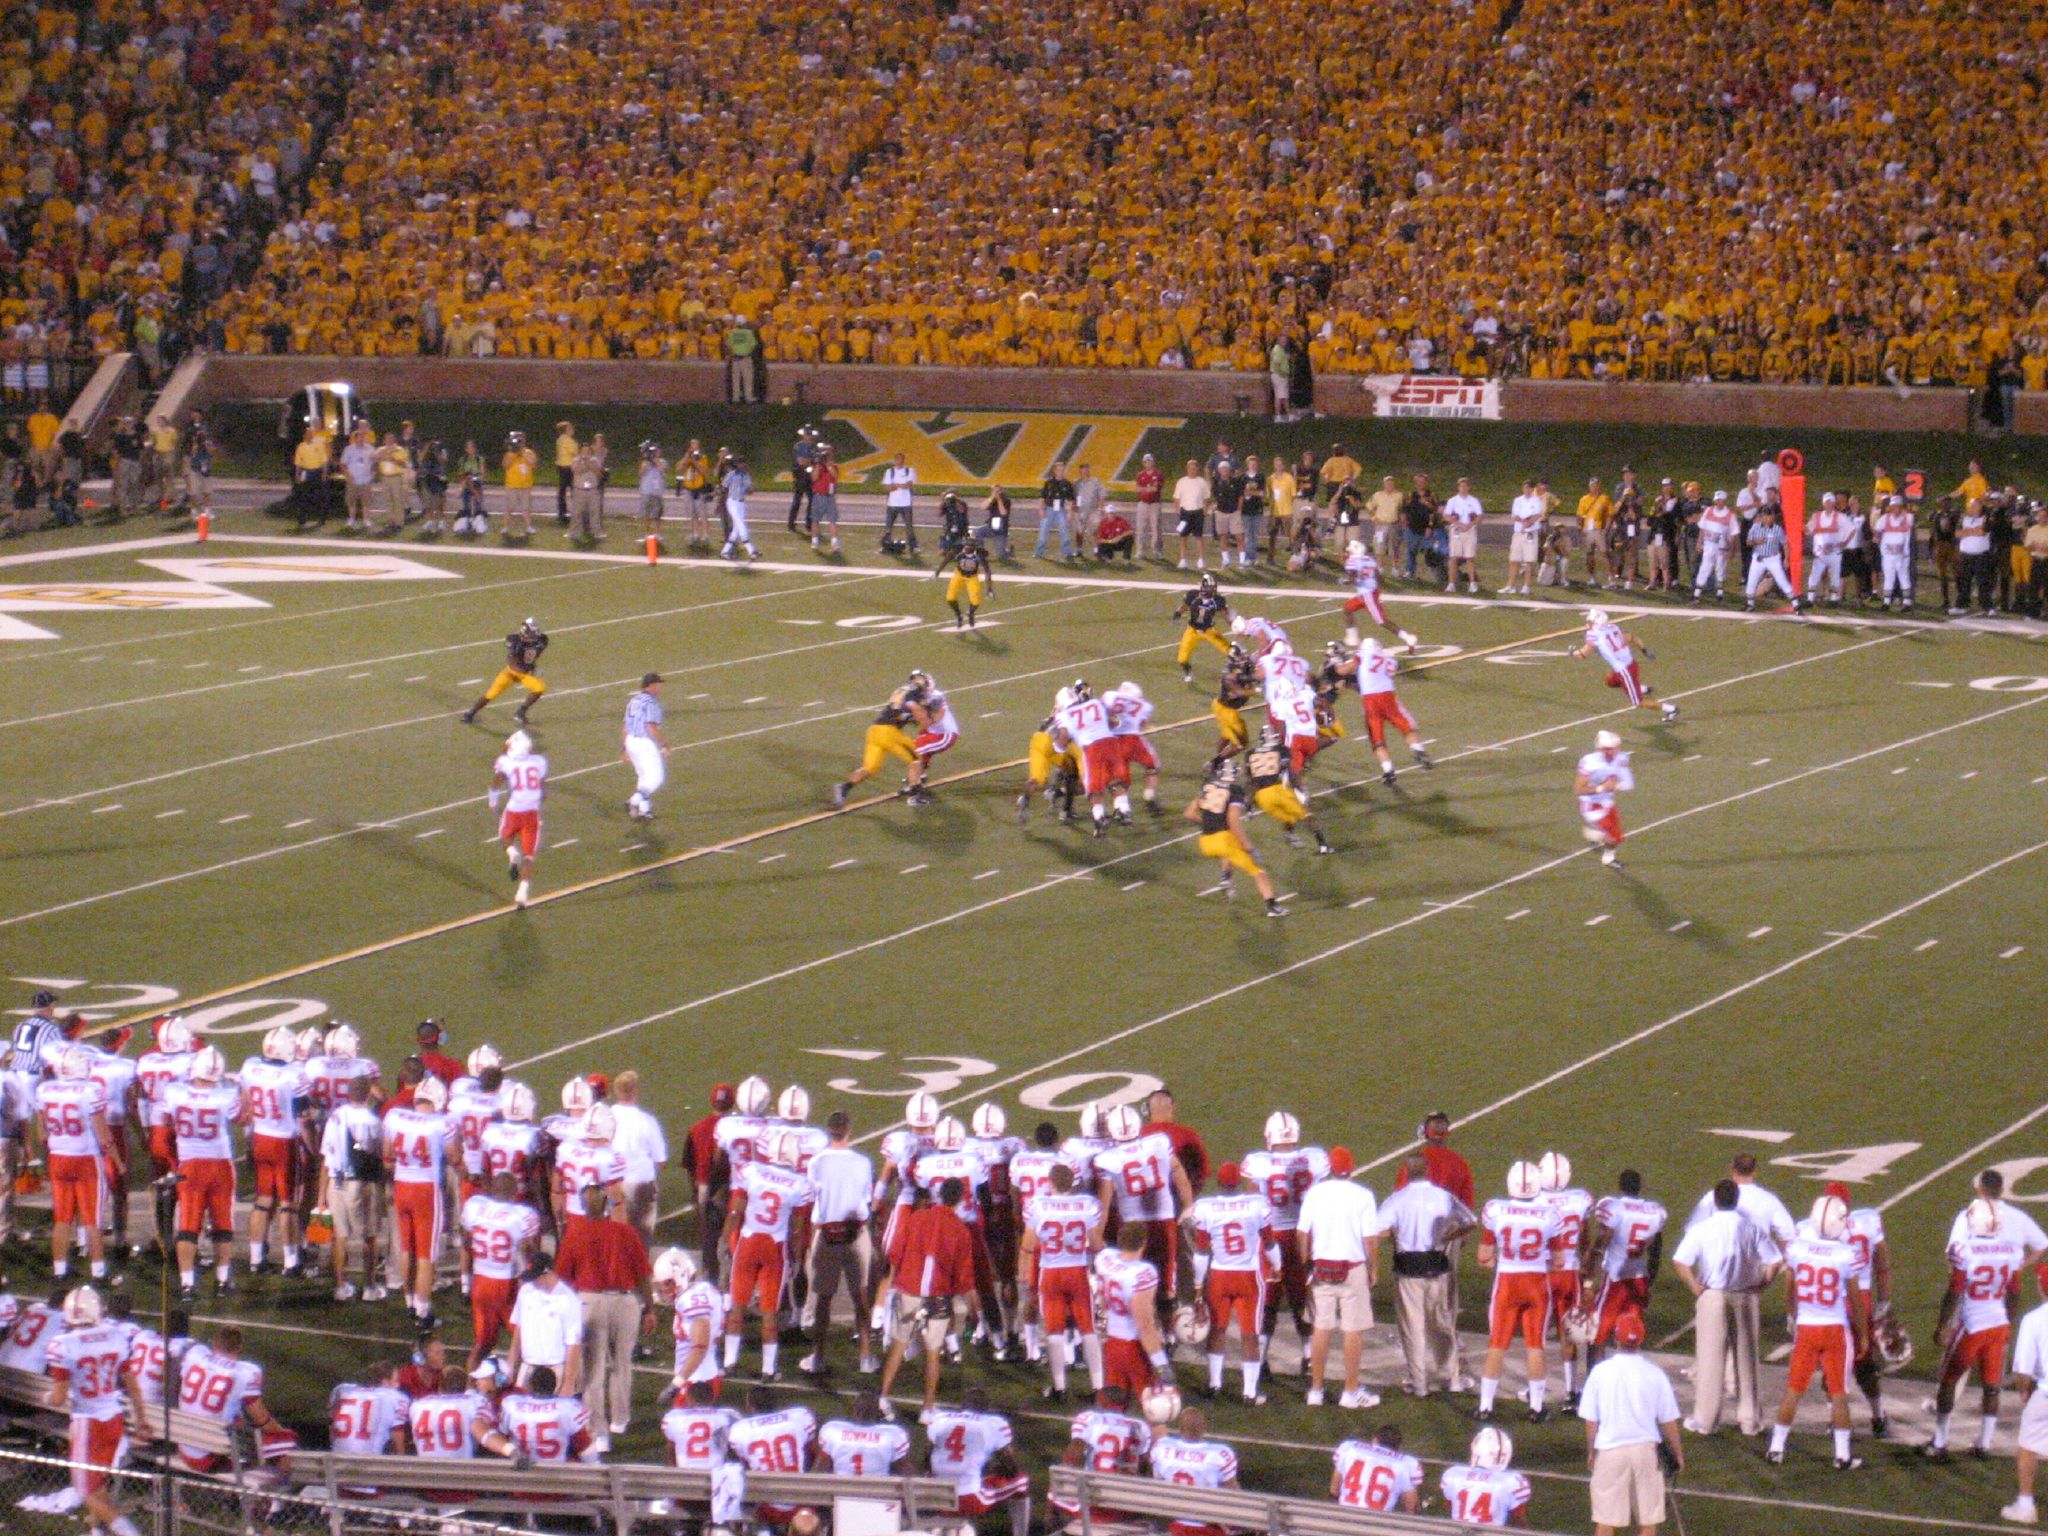 a football game being played with the red and white uniforms